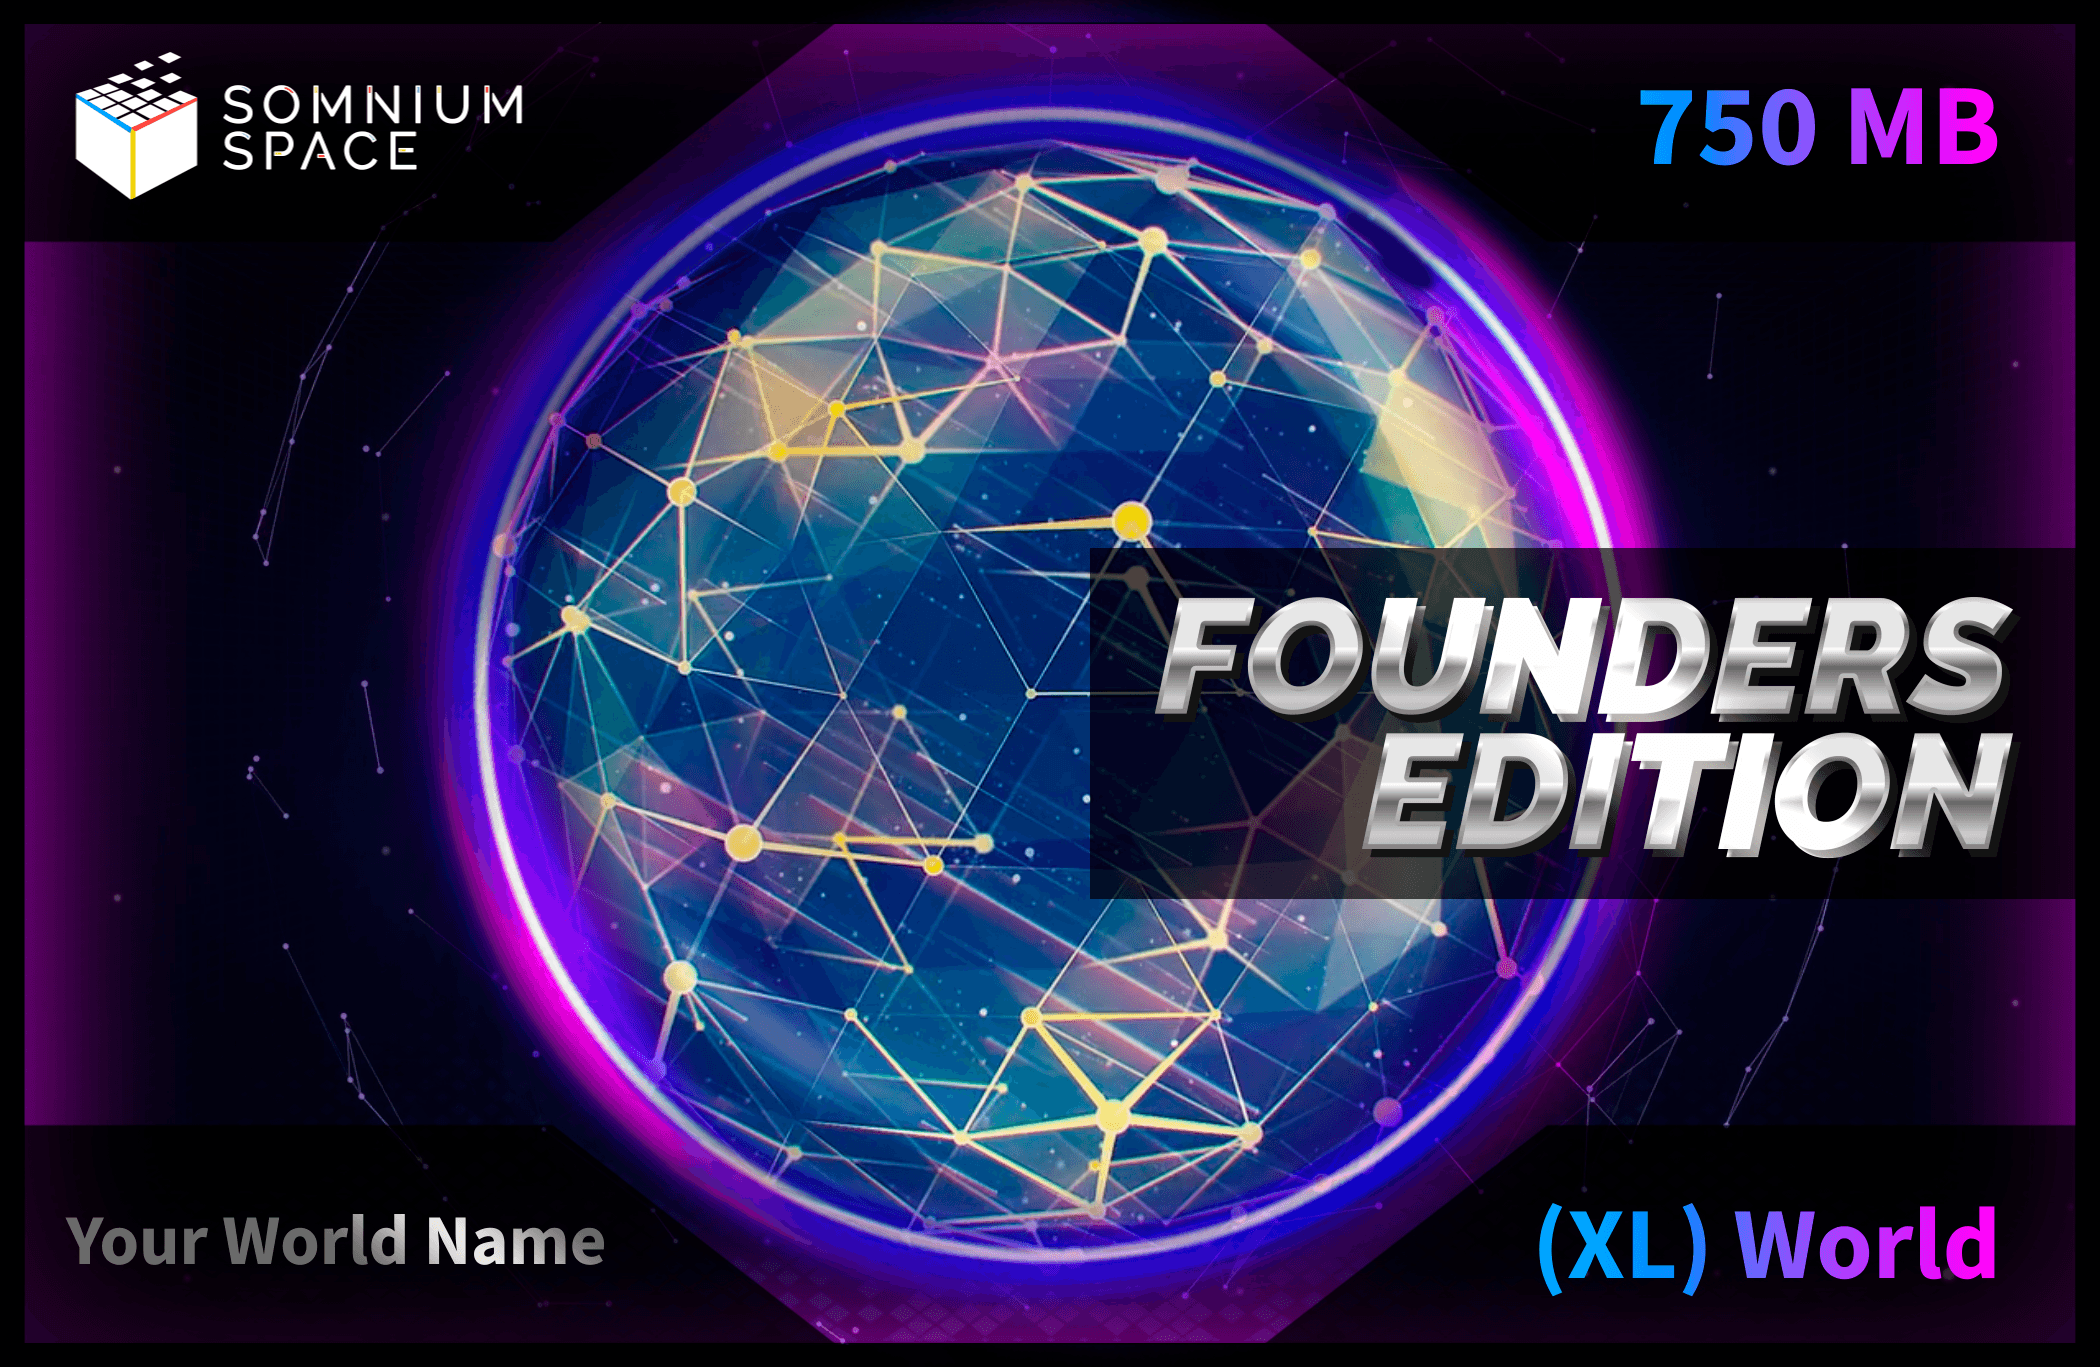 Extra Large (XL) WORLD in Somnium Space - Founders Edition (FE)